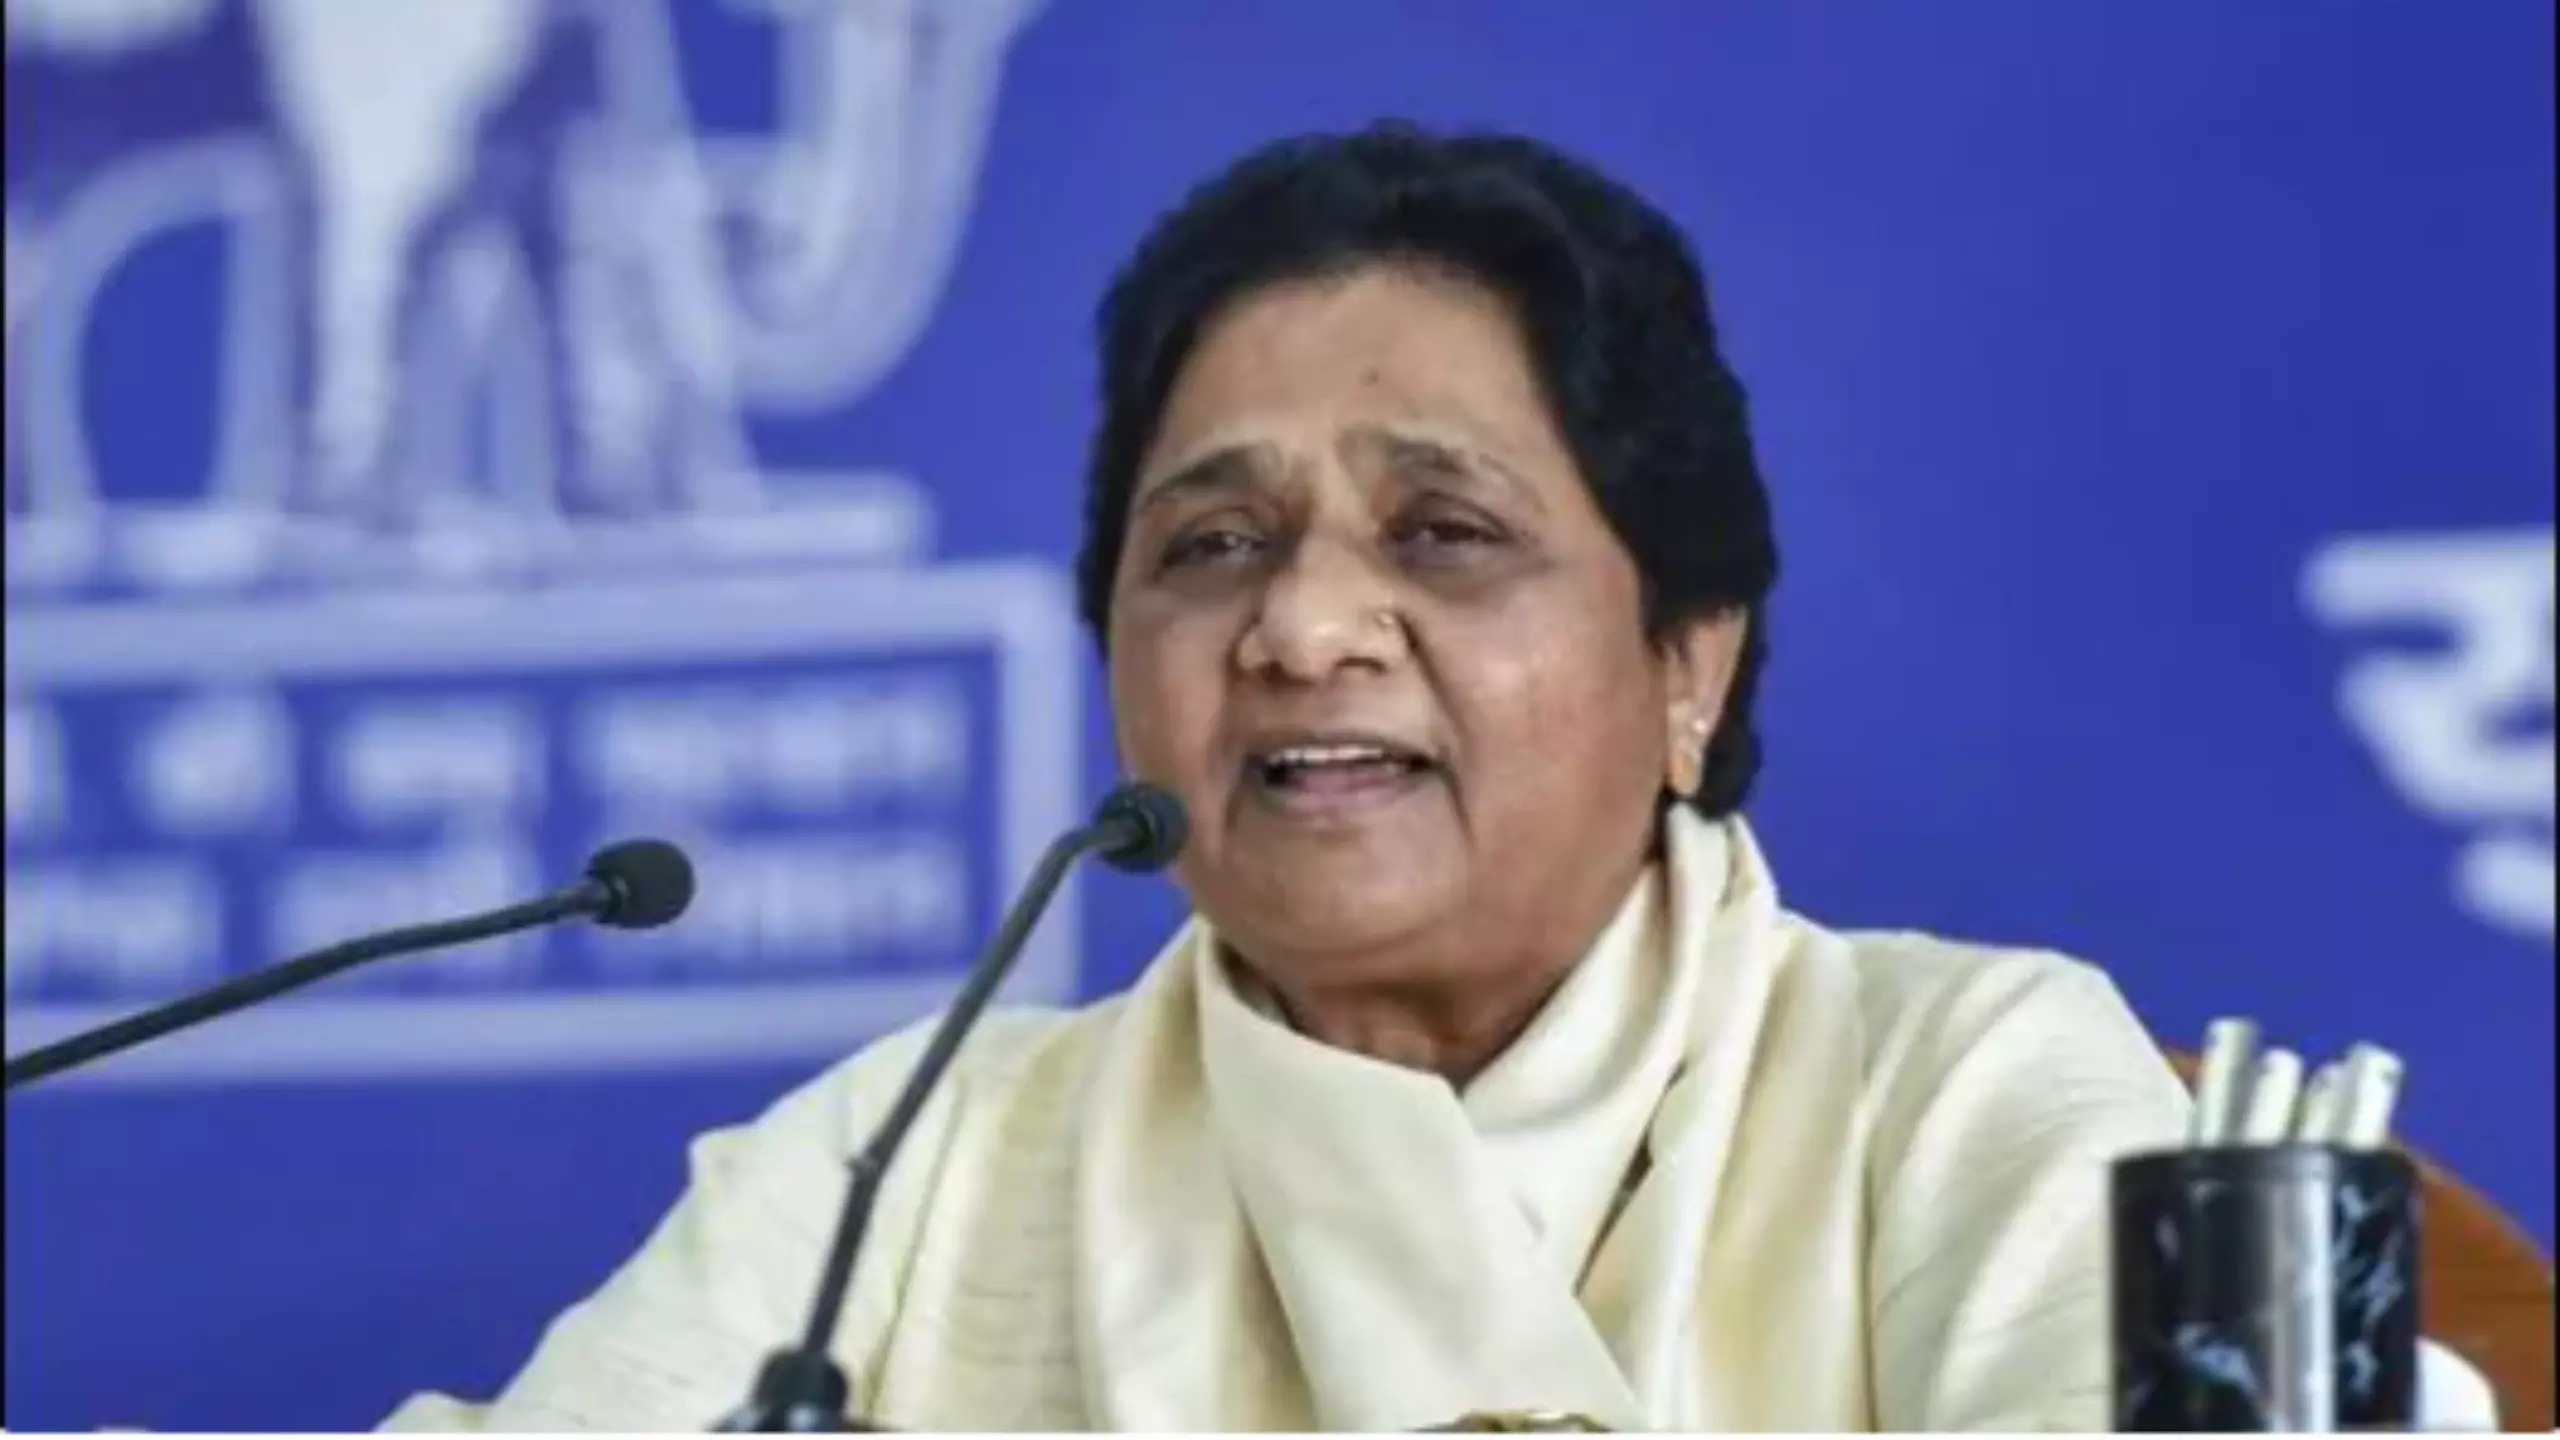 Mayawati says govt should seriously consider demands of farmers